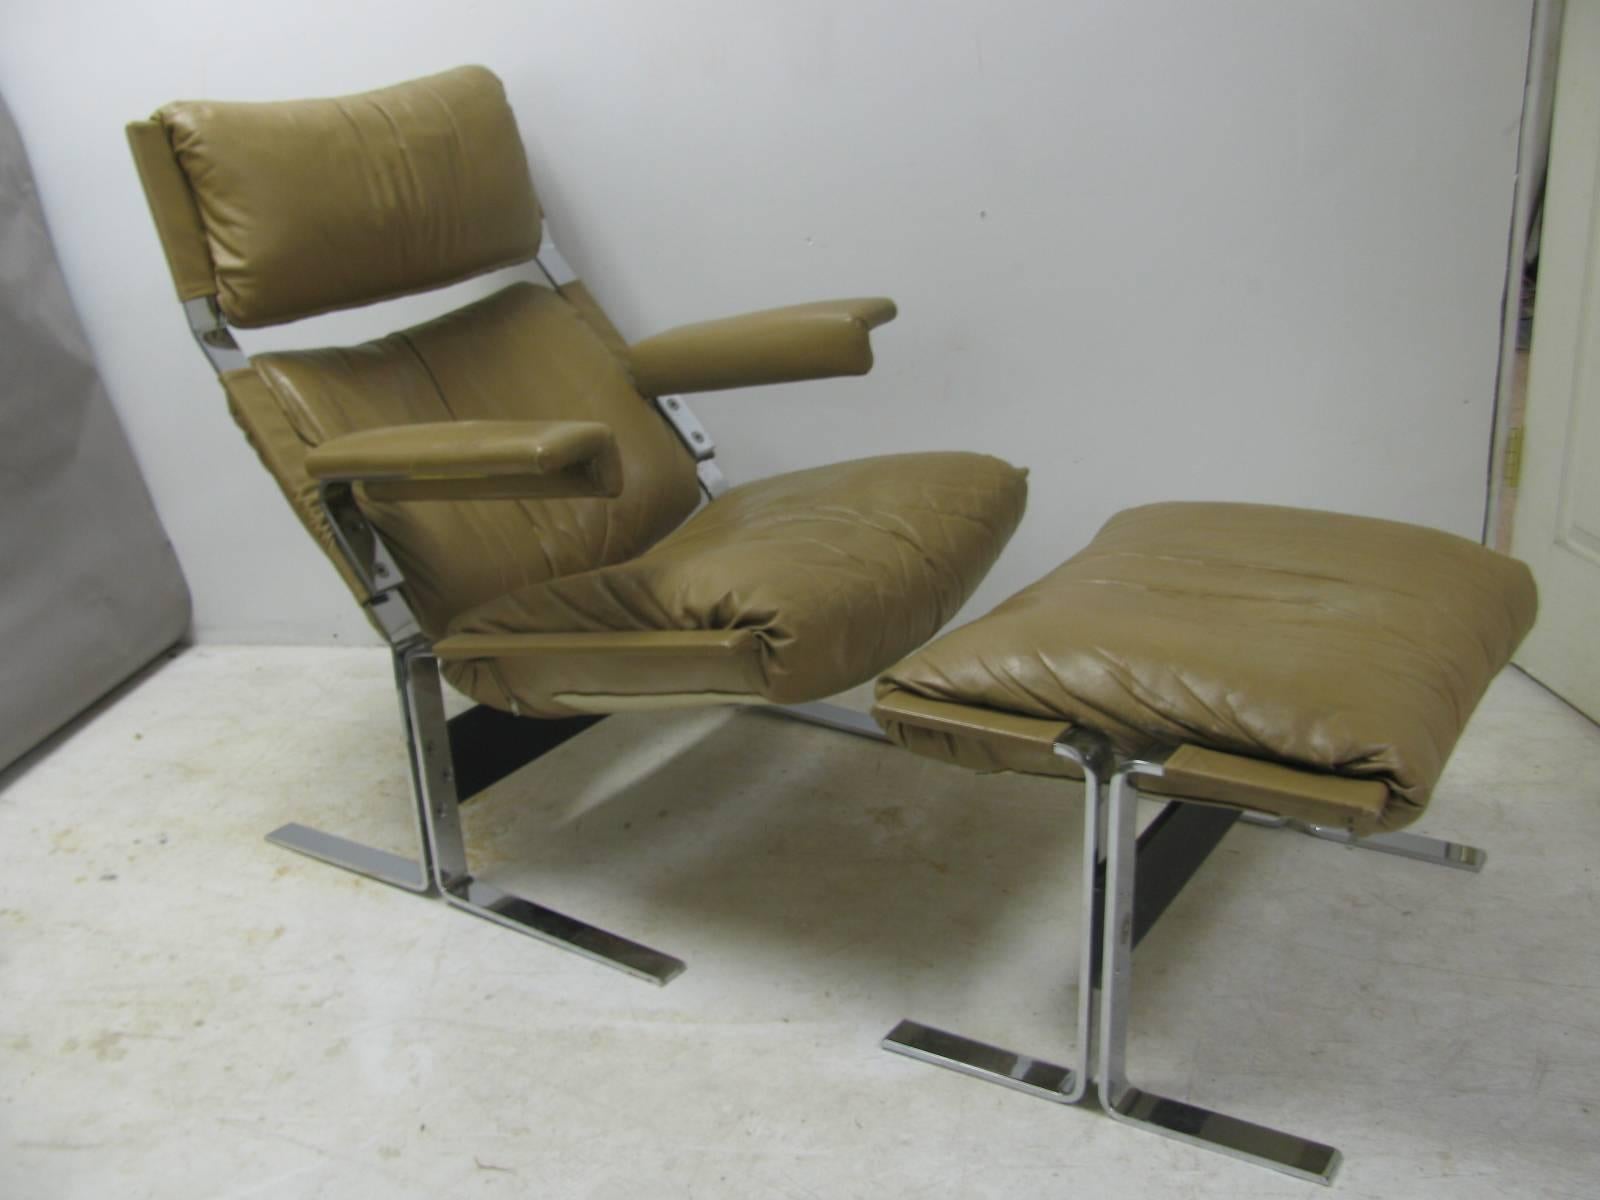 Fabulous design along with max comfort. All the right angles mixed with great materials make for a ultra comfort chair with ottoman. Heavy plated nickel chrome frame gives the strength to the piece while cushy leather/foam padding supplies the